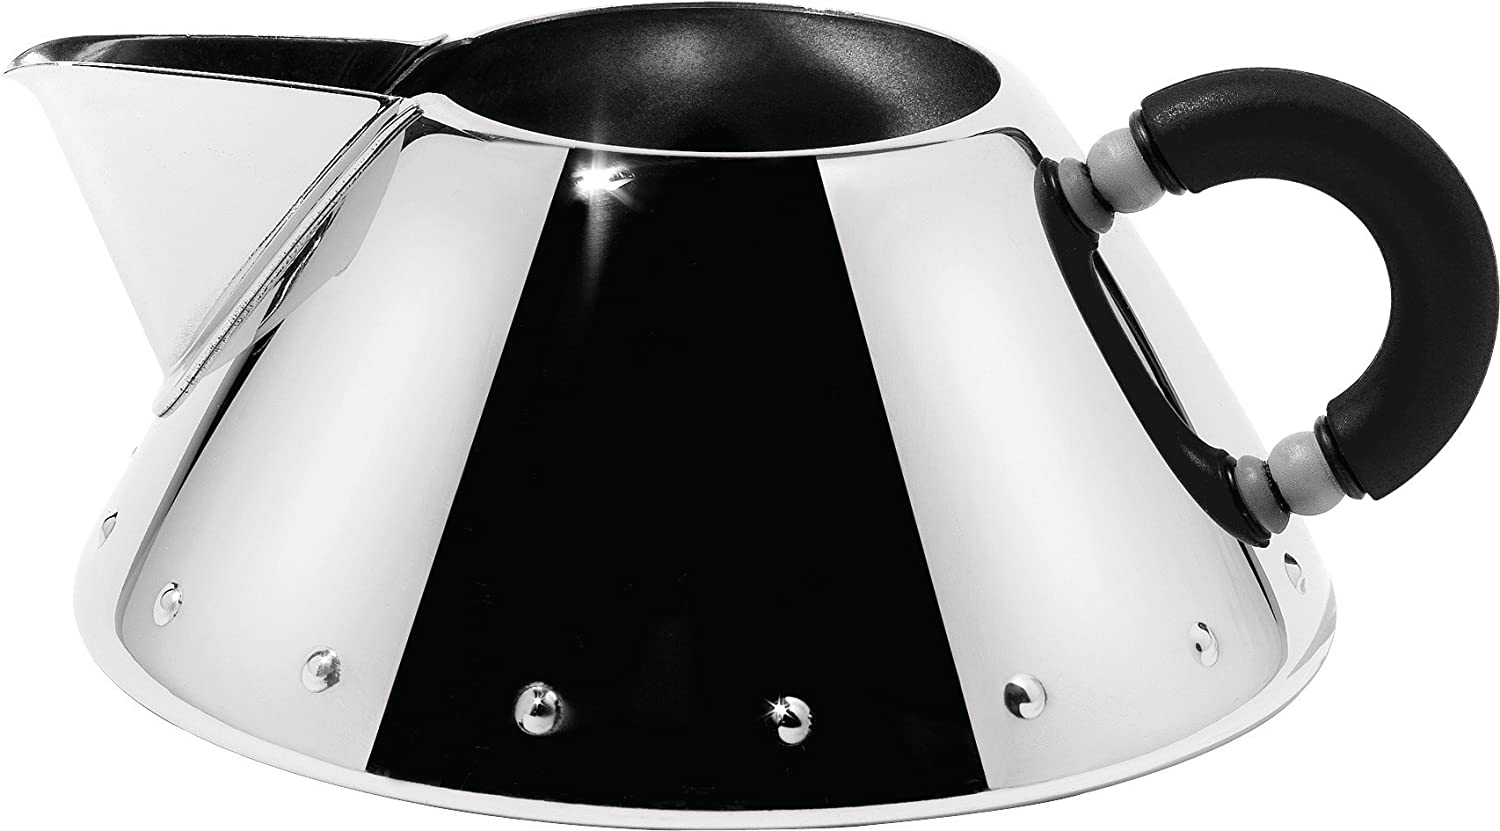 Alessi 9096 B Teapot Stainless Steel with Polyamide Handle Black